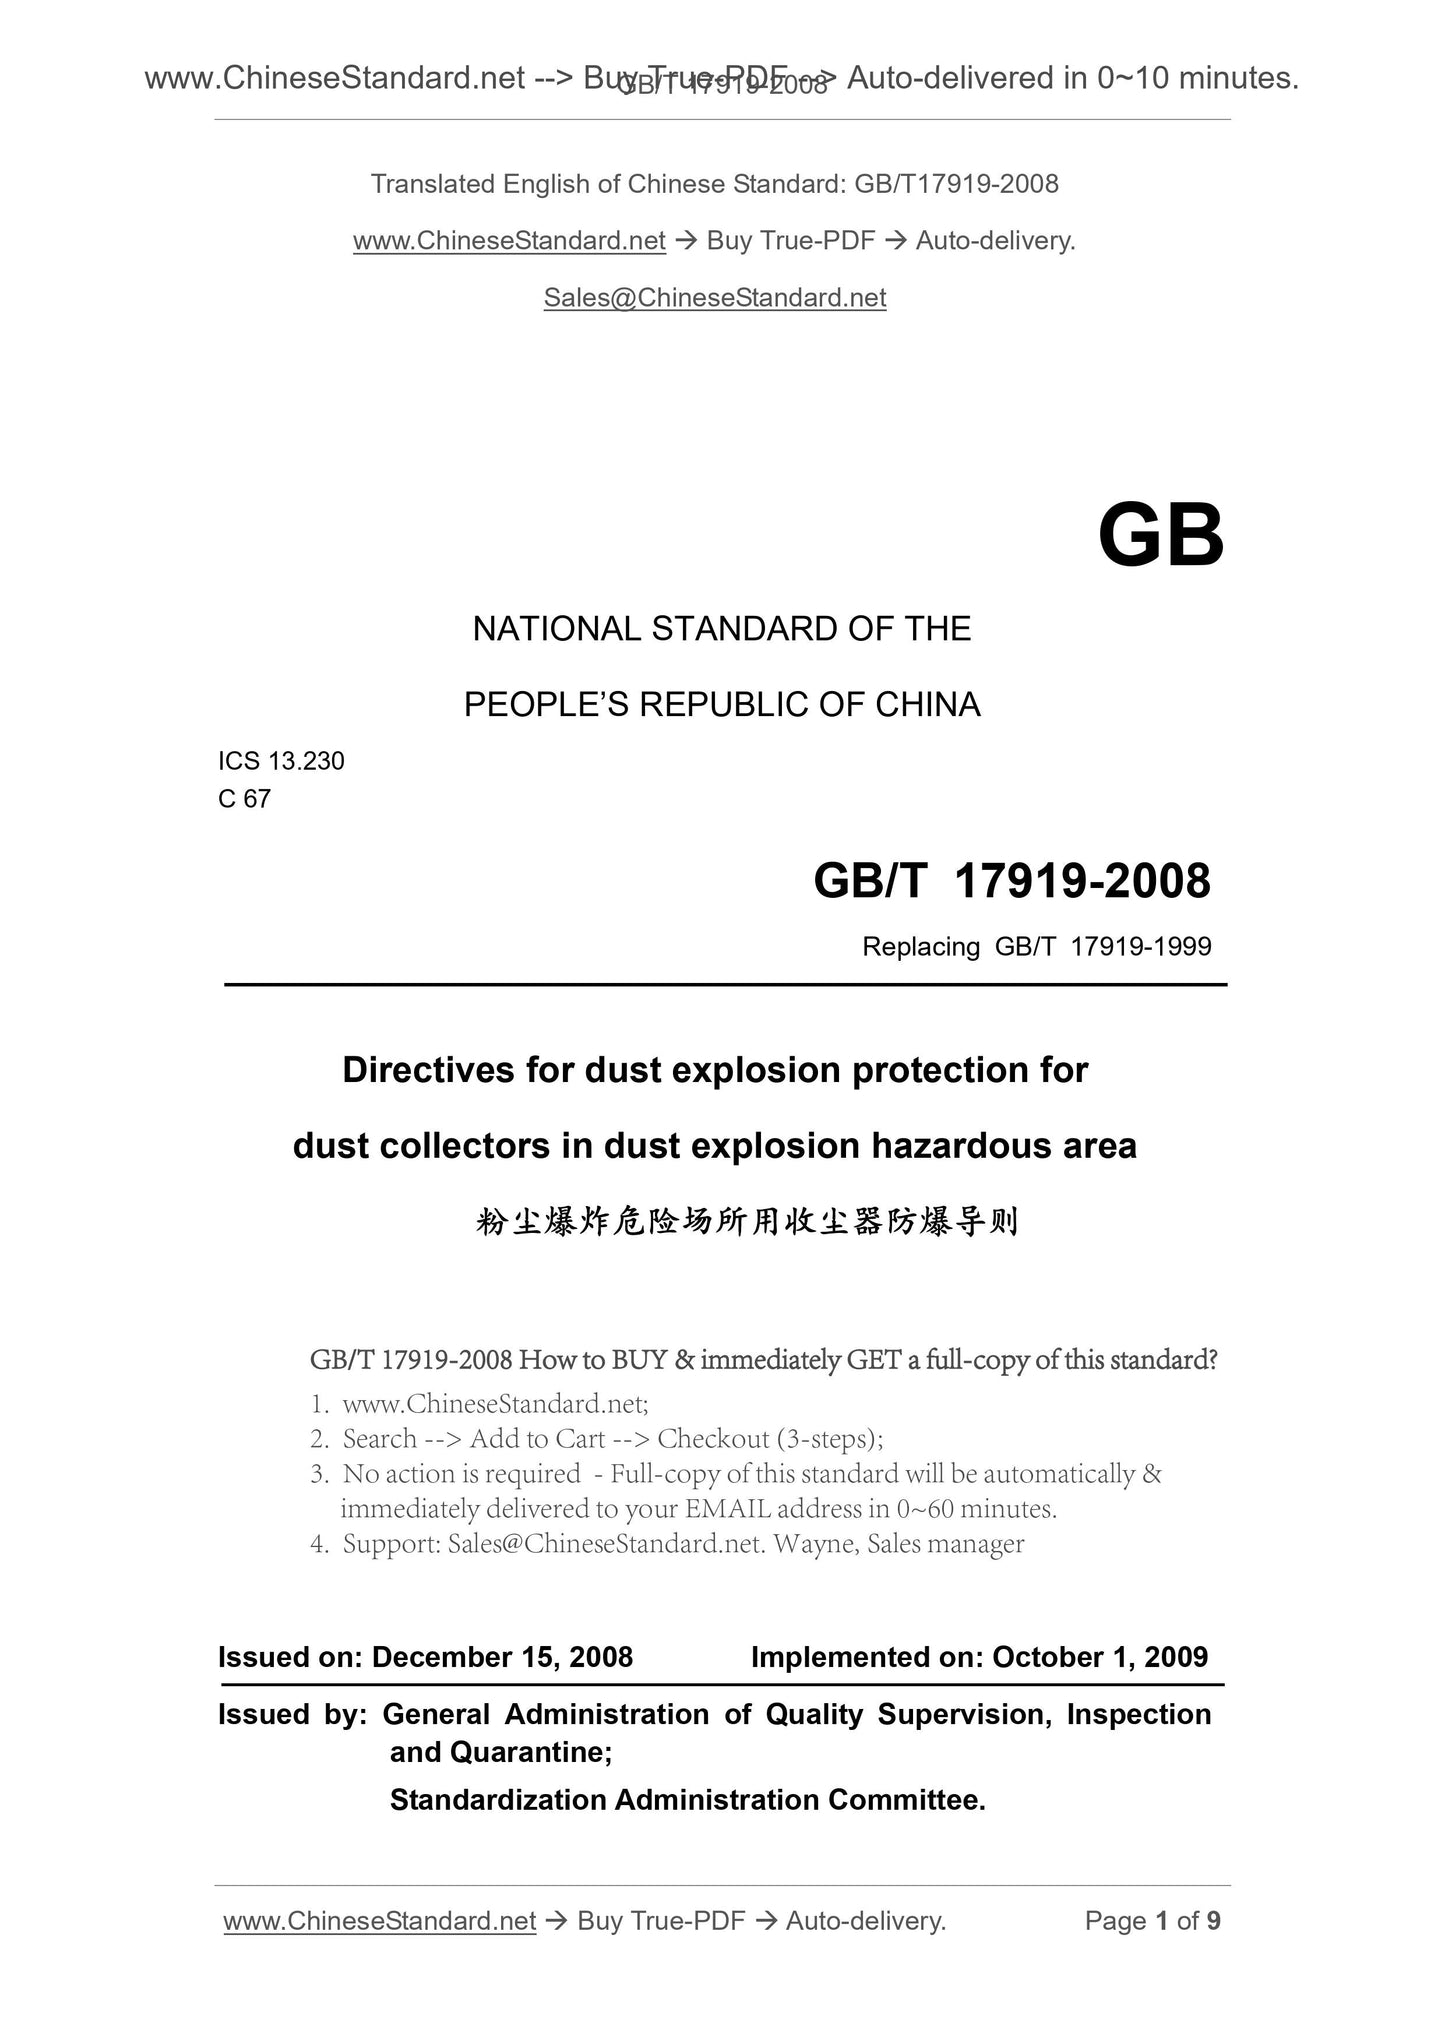 GB/T 17919-2008 Page 1